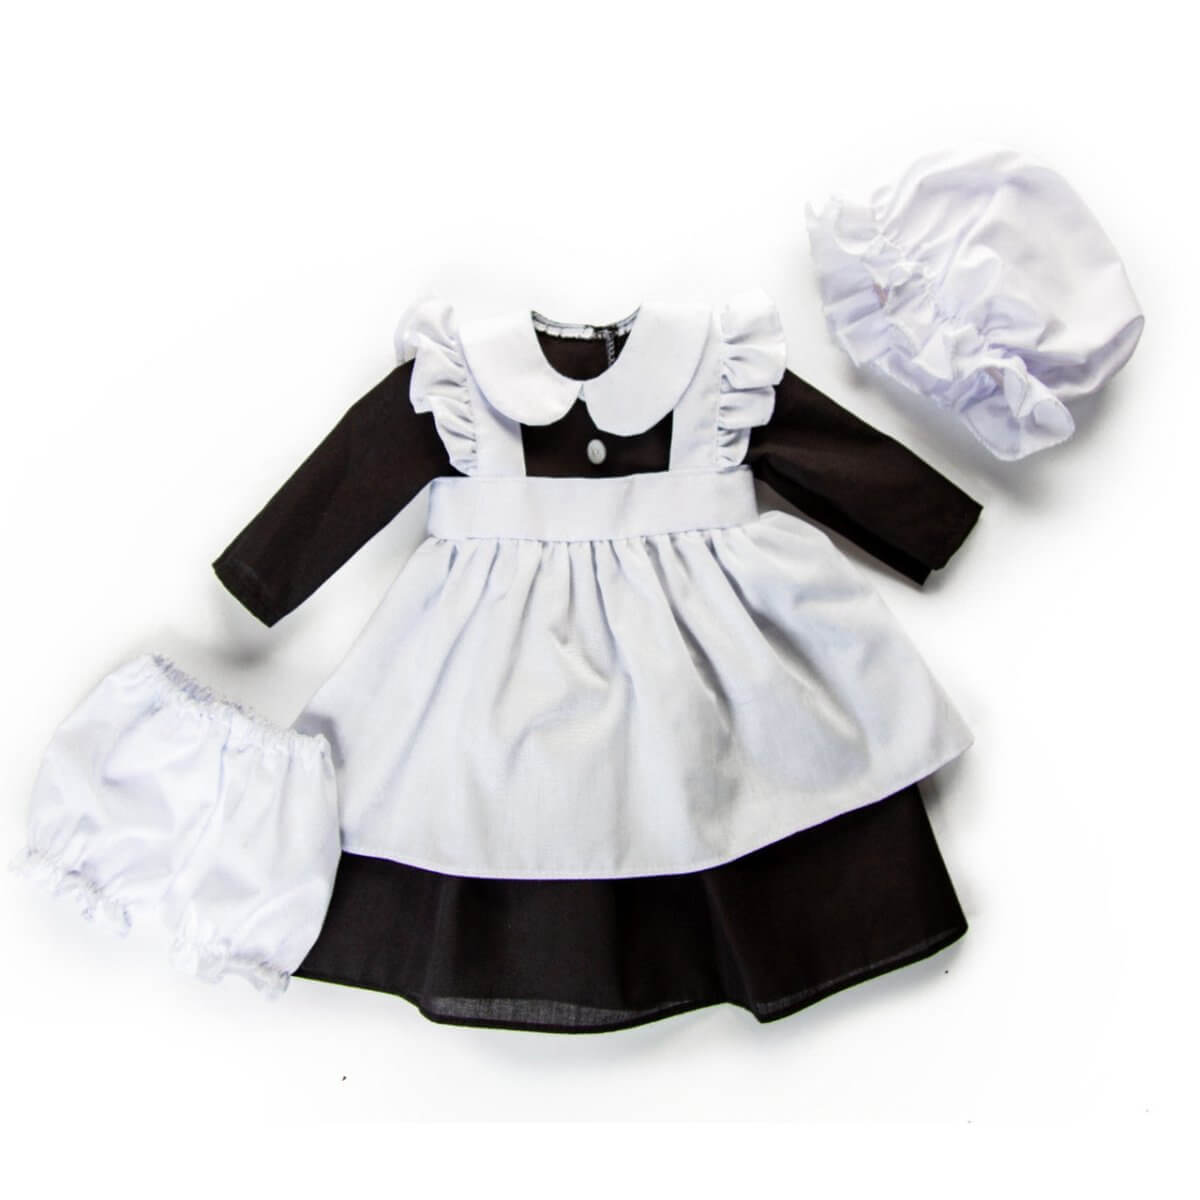 4 Piece Scullery Kitchen Maid Outfit, Doll Clothes for 18 Inch Dolls - Simon's Collectibles